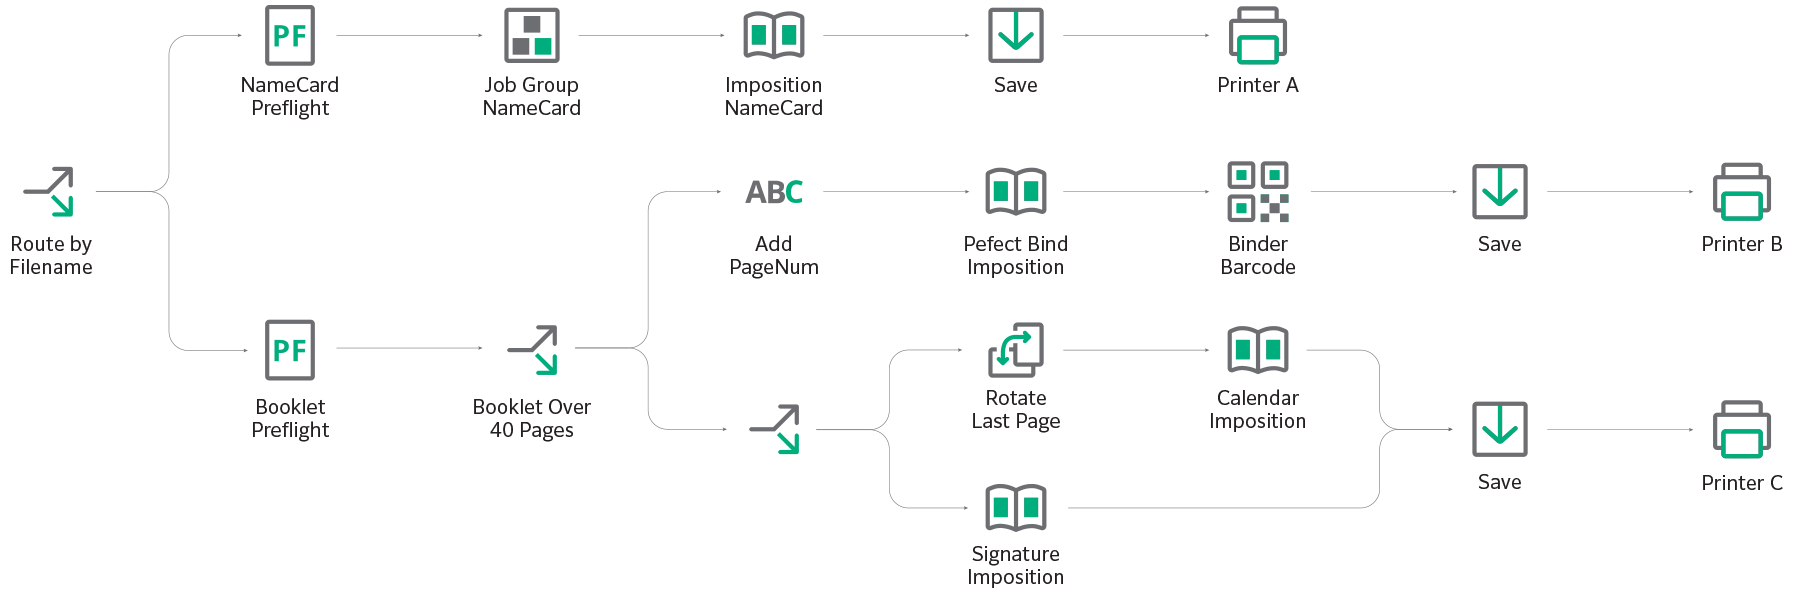 Illustration example of rule-based automation workflow.